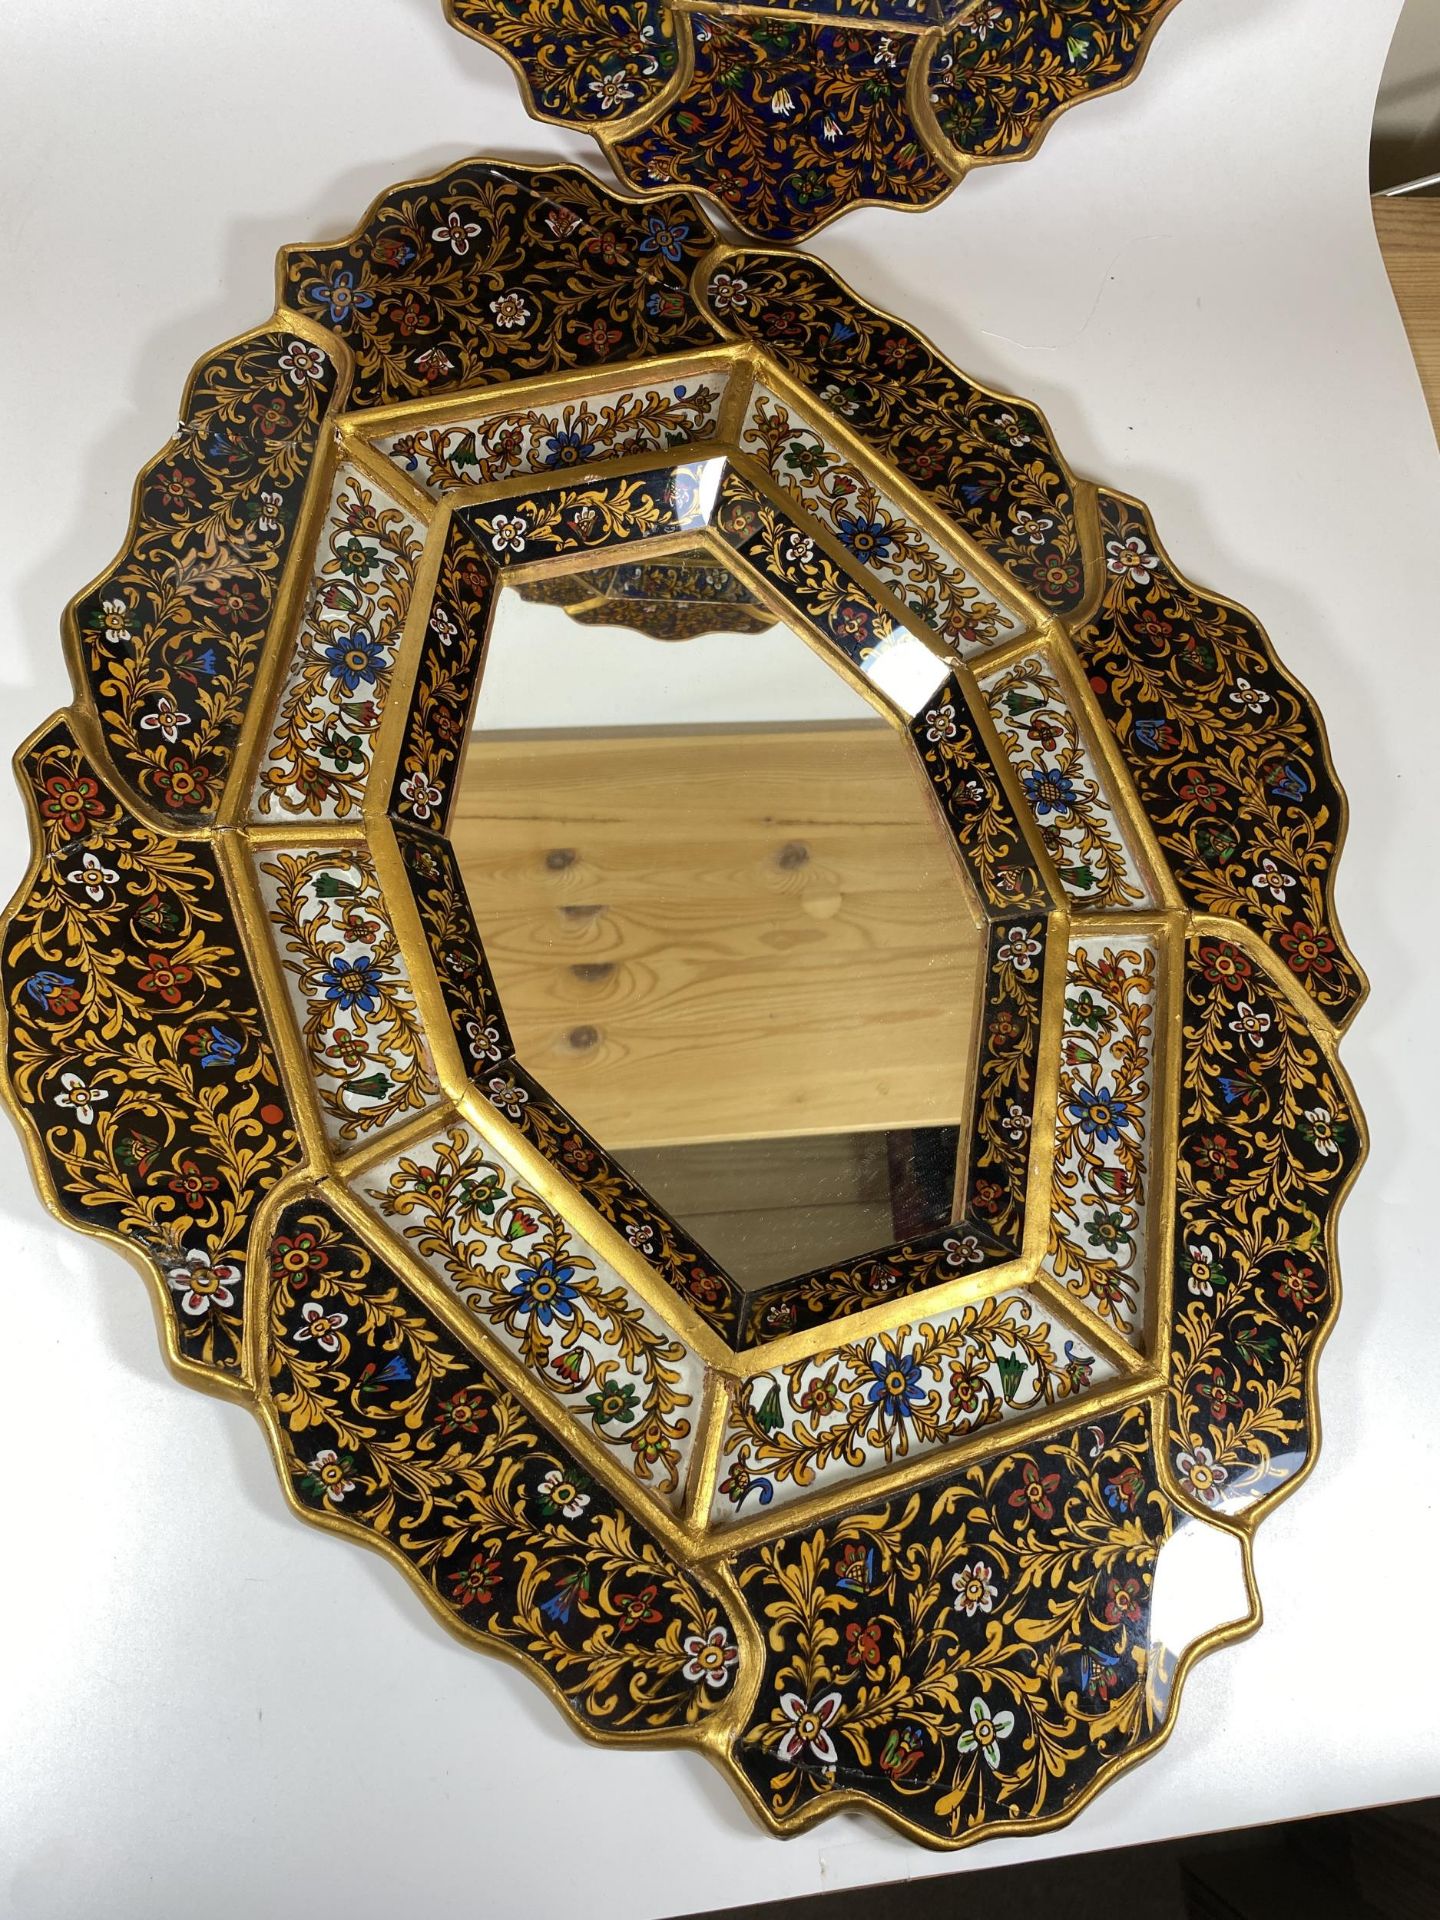 TWO MIDDLE EASTERN STYLE DECORATIVE PANELLED MIRRORS, LARGEST 59 X 46CM - Image 3 of 5